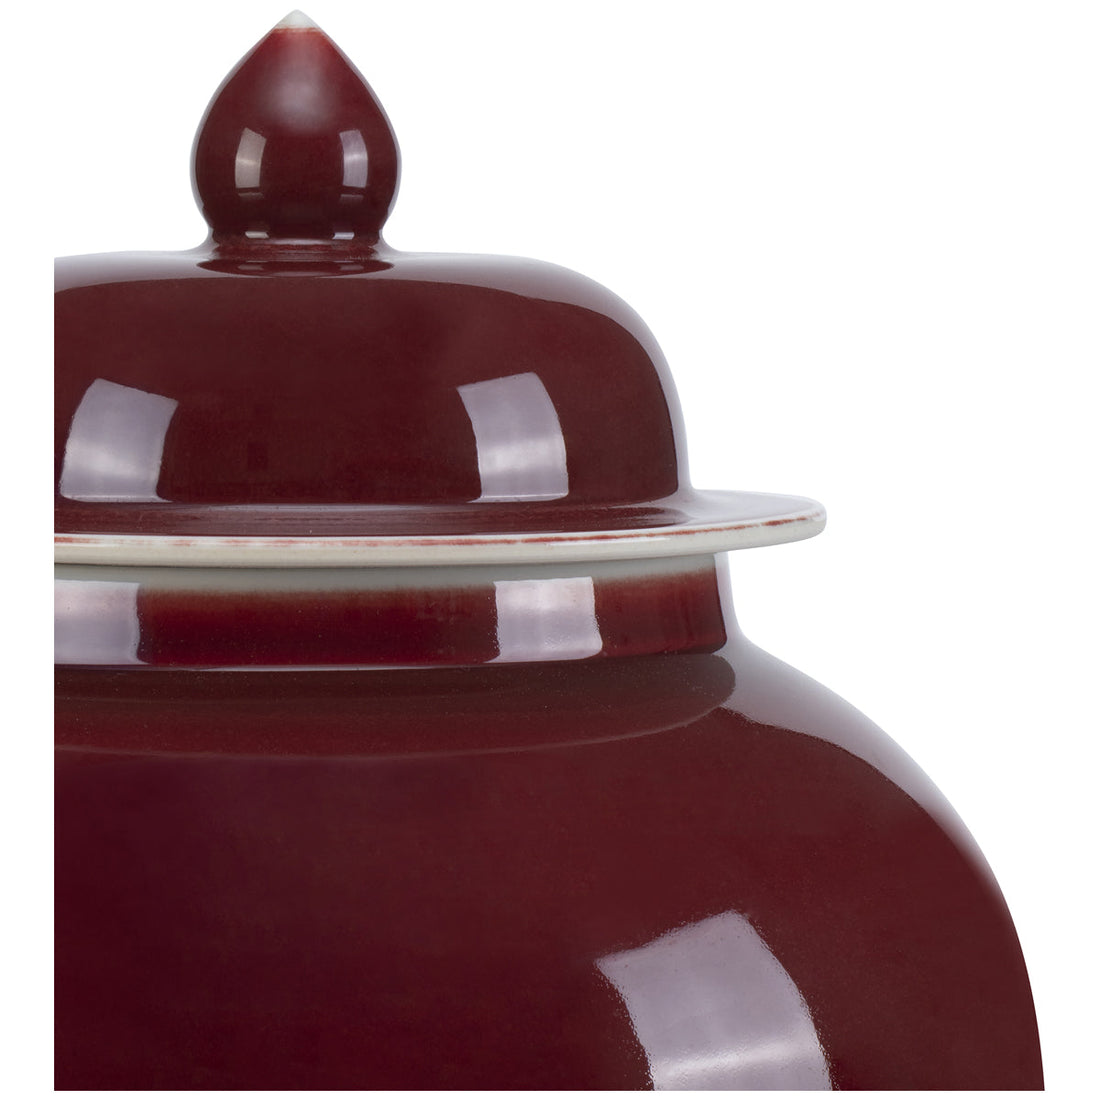 Currey and Company Oxblood Large Temple Jar